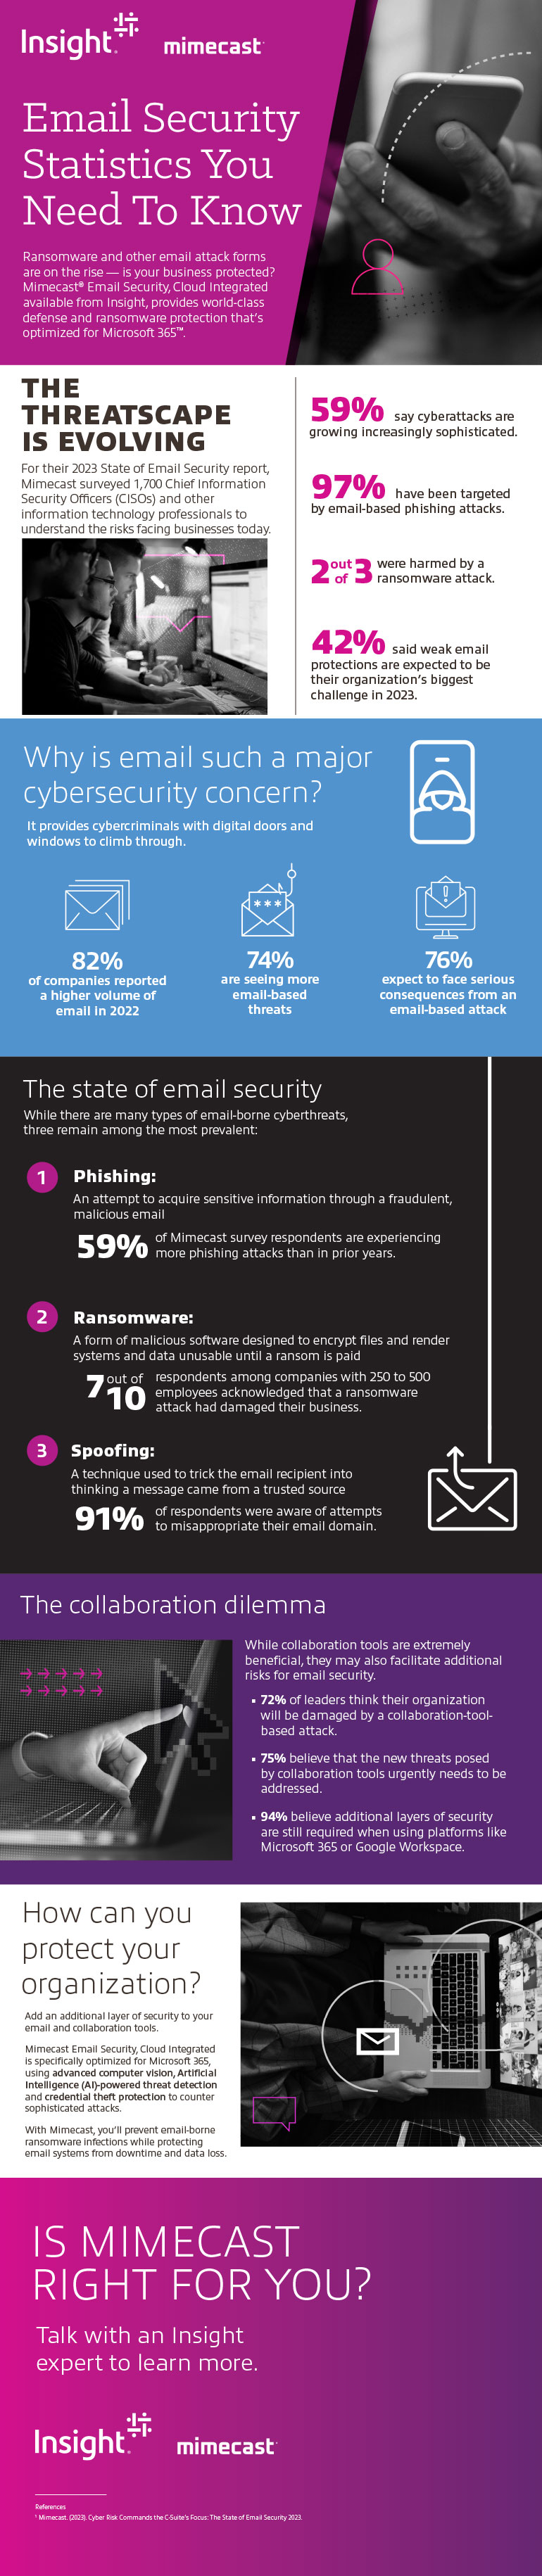 Email Security Statistics You Need to Know  infographic